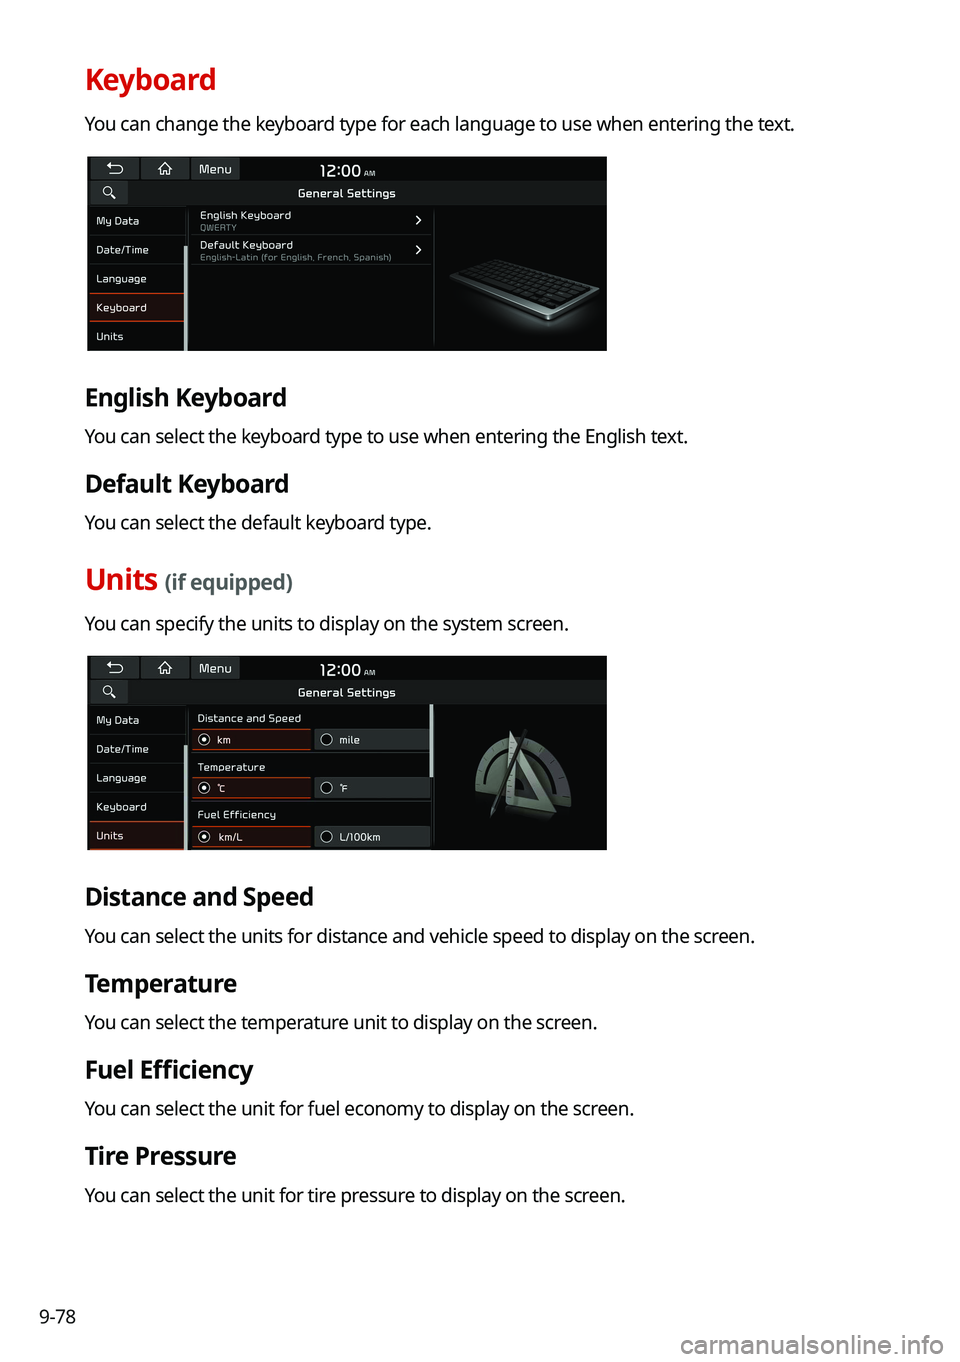 KIA SOUL 2022  Navigation System Quick Reference Guide 9-78
Keyboard
You can change the keyboard type for each language to use when entering the text.
English Keyboard
You can select the keyboard type to use when entering the English text.
Default Keyboar